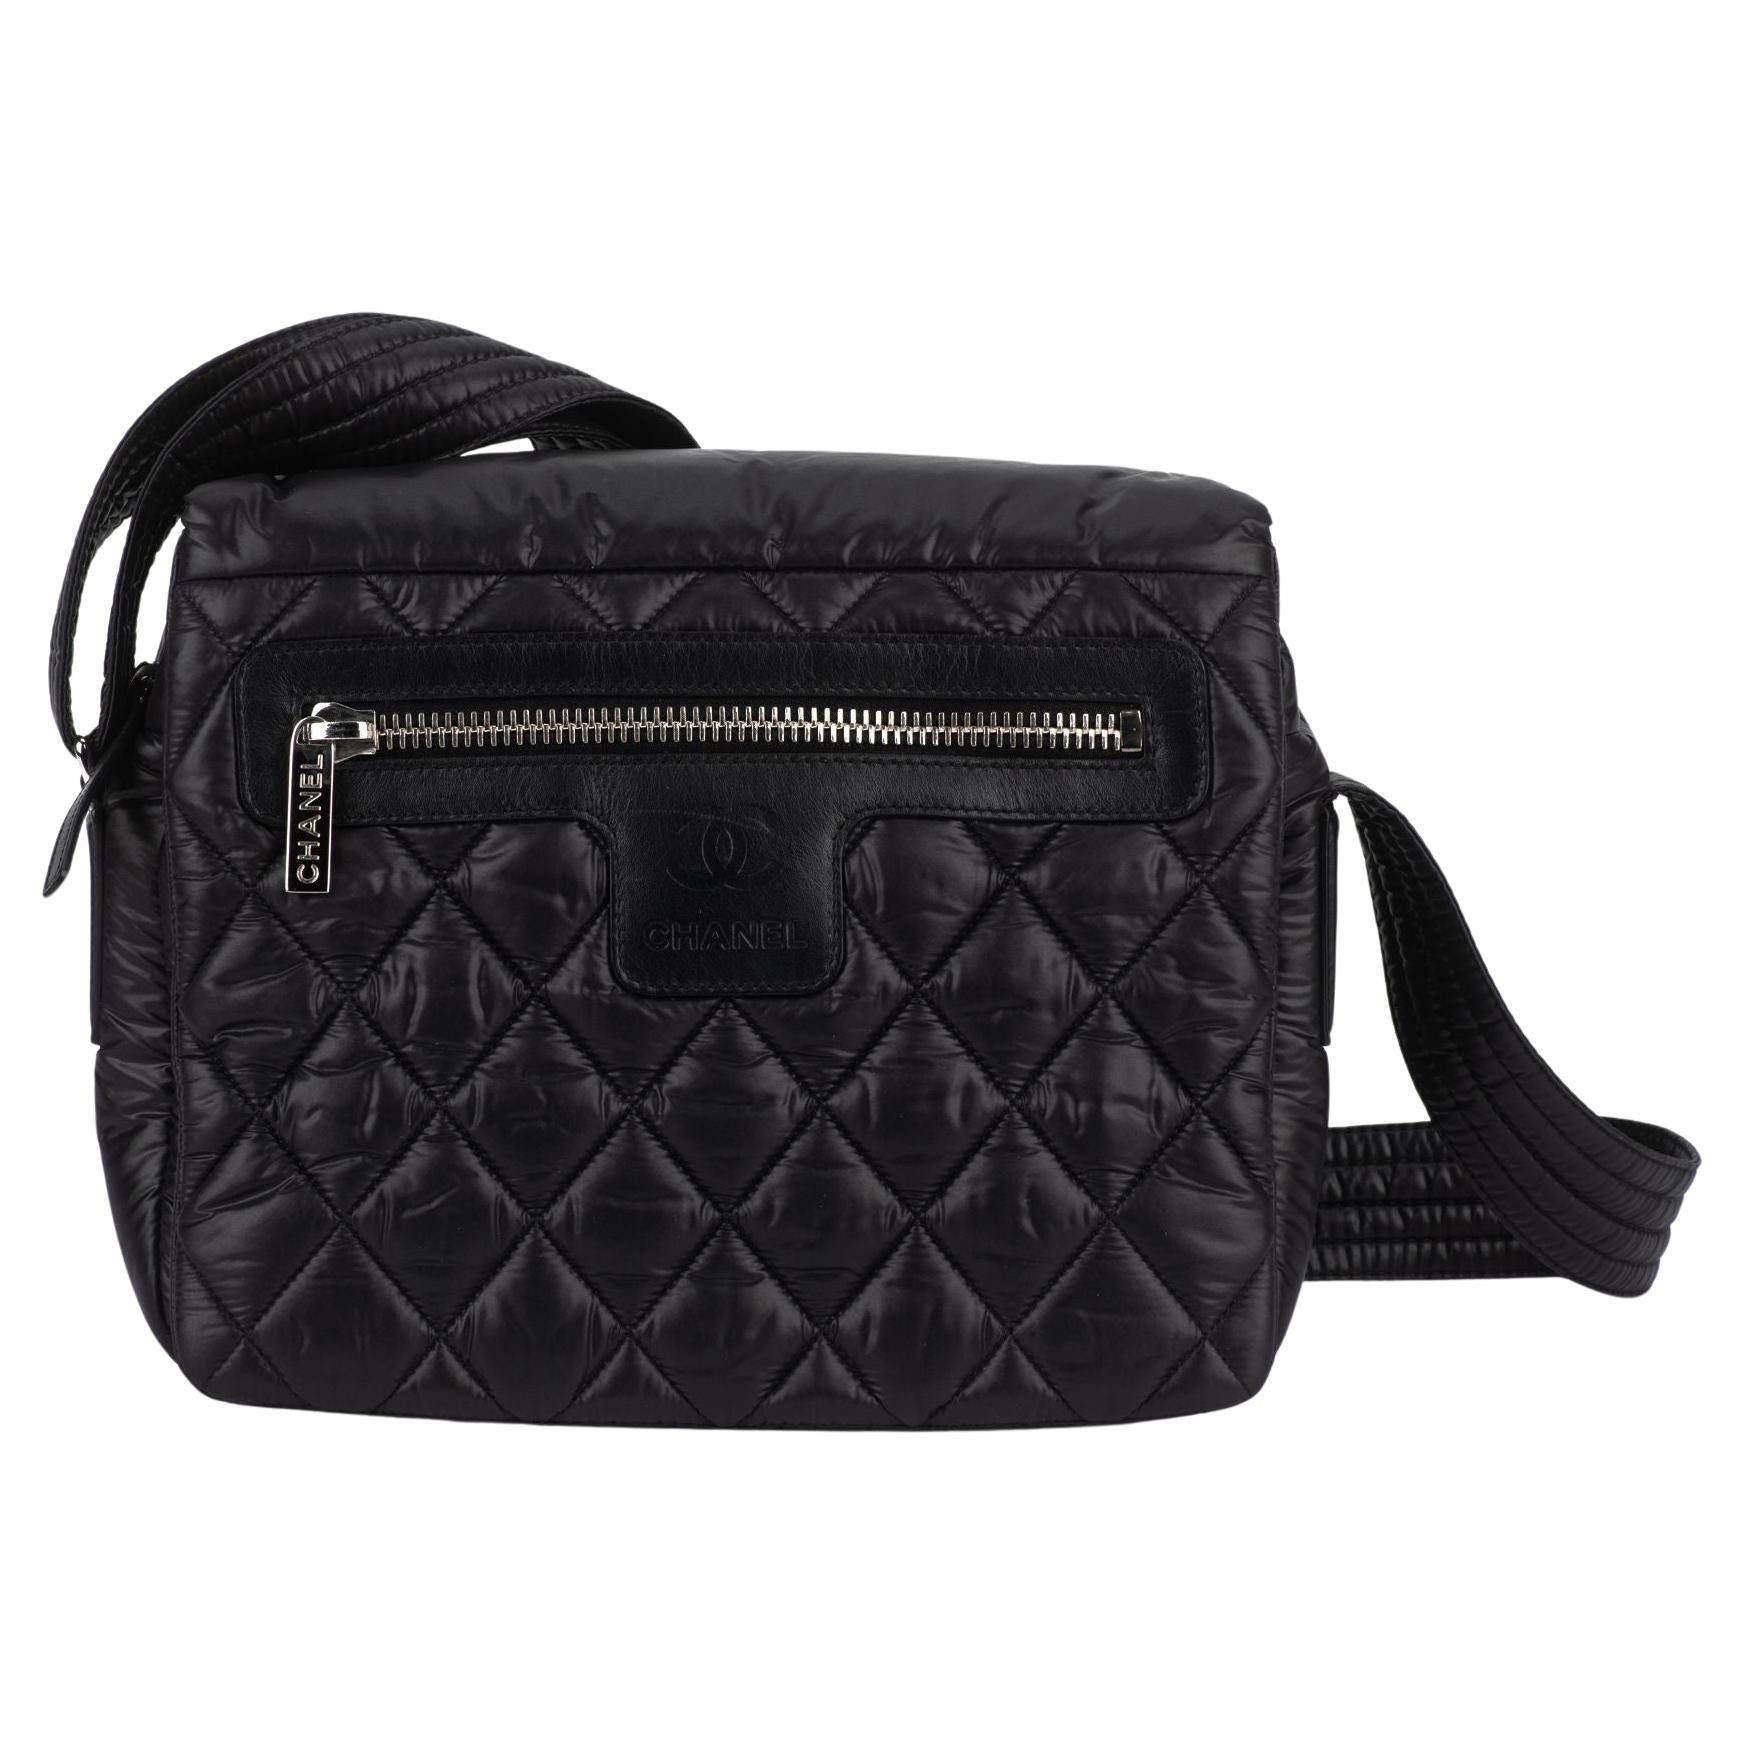 Chanel Black Coco Cocoon Cross Body Bag For Sale